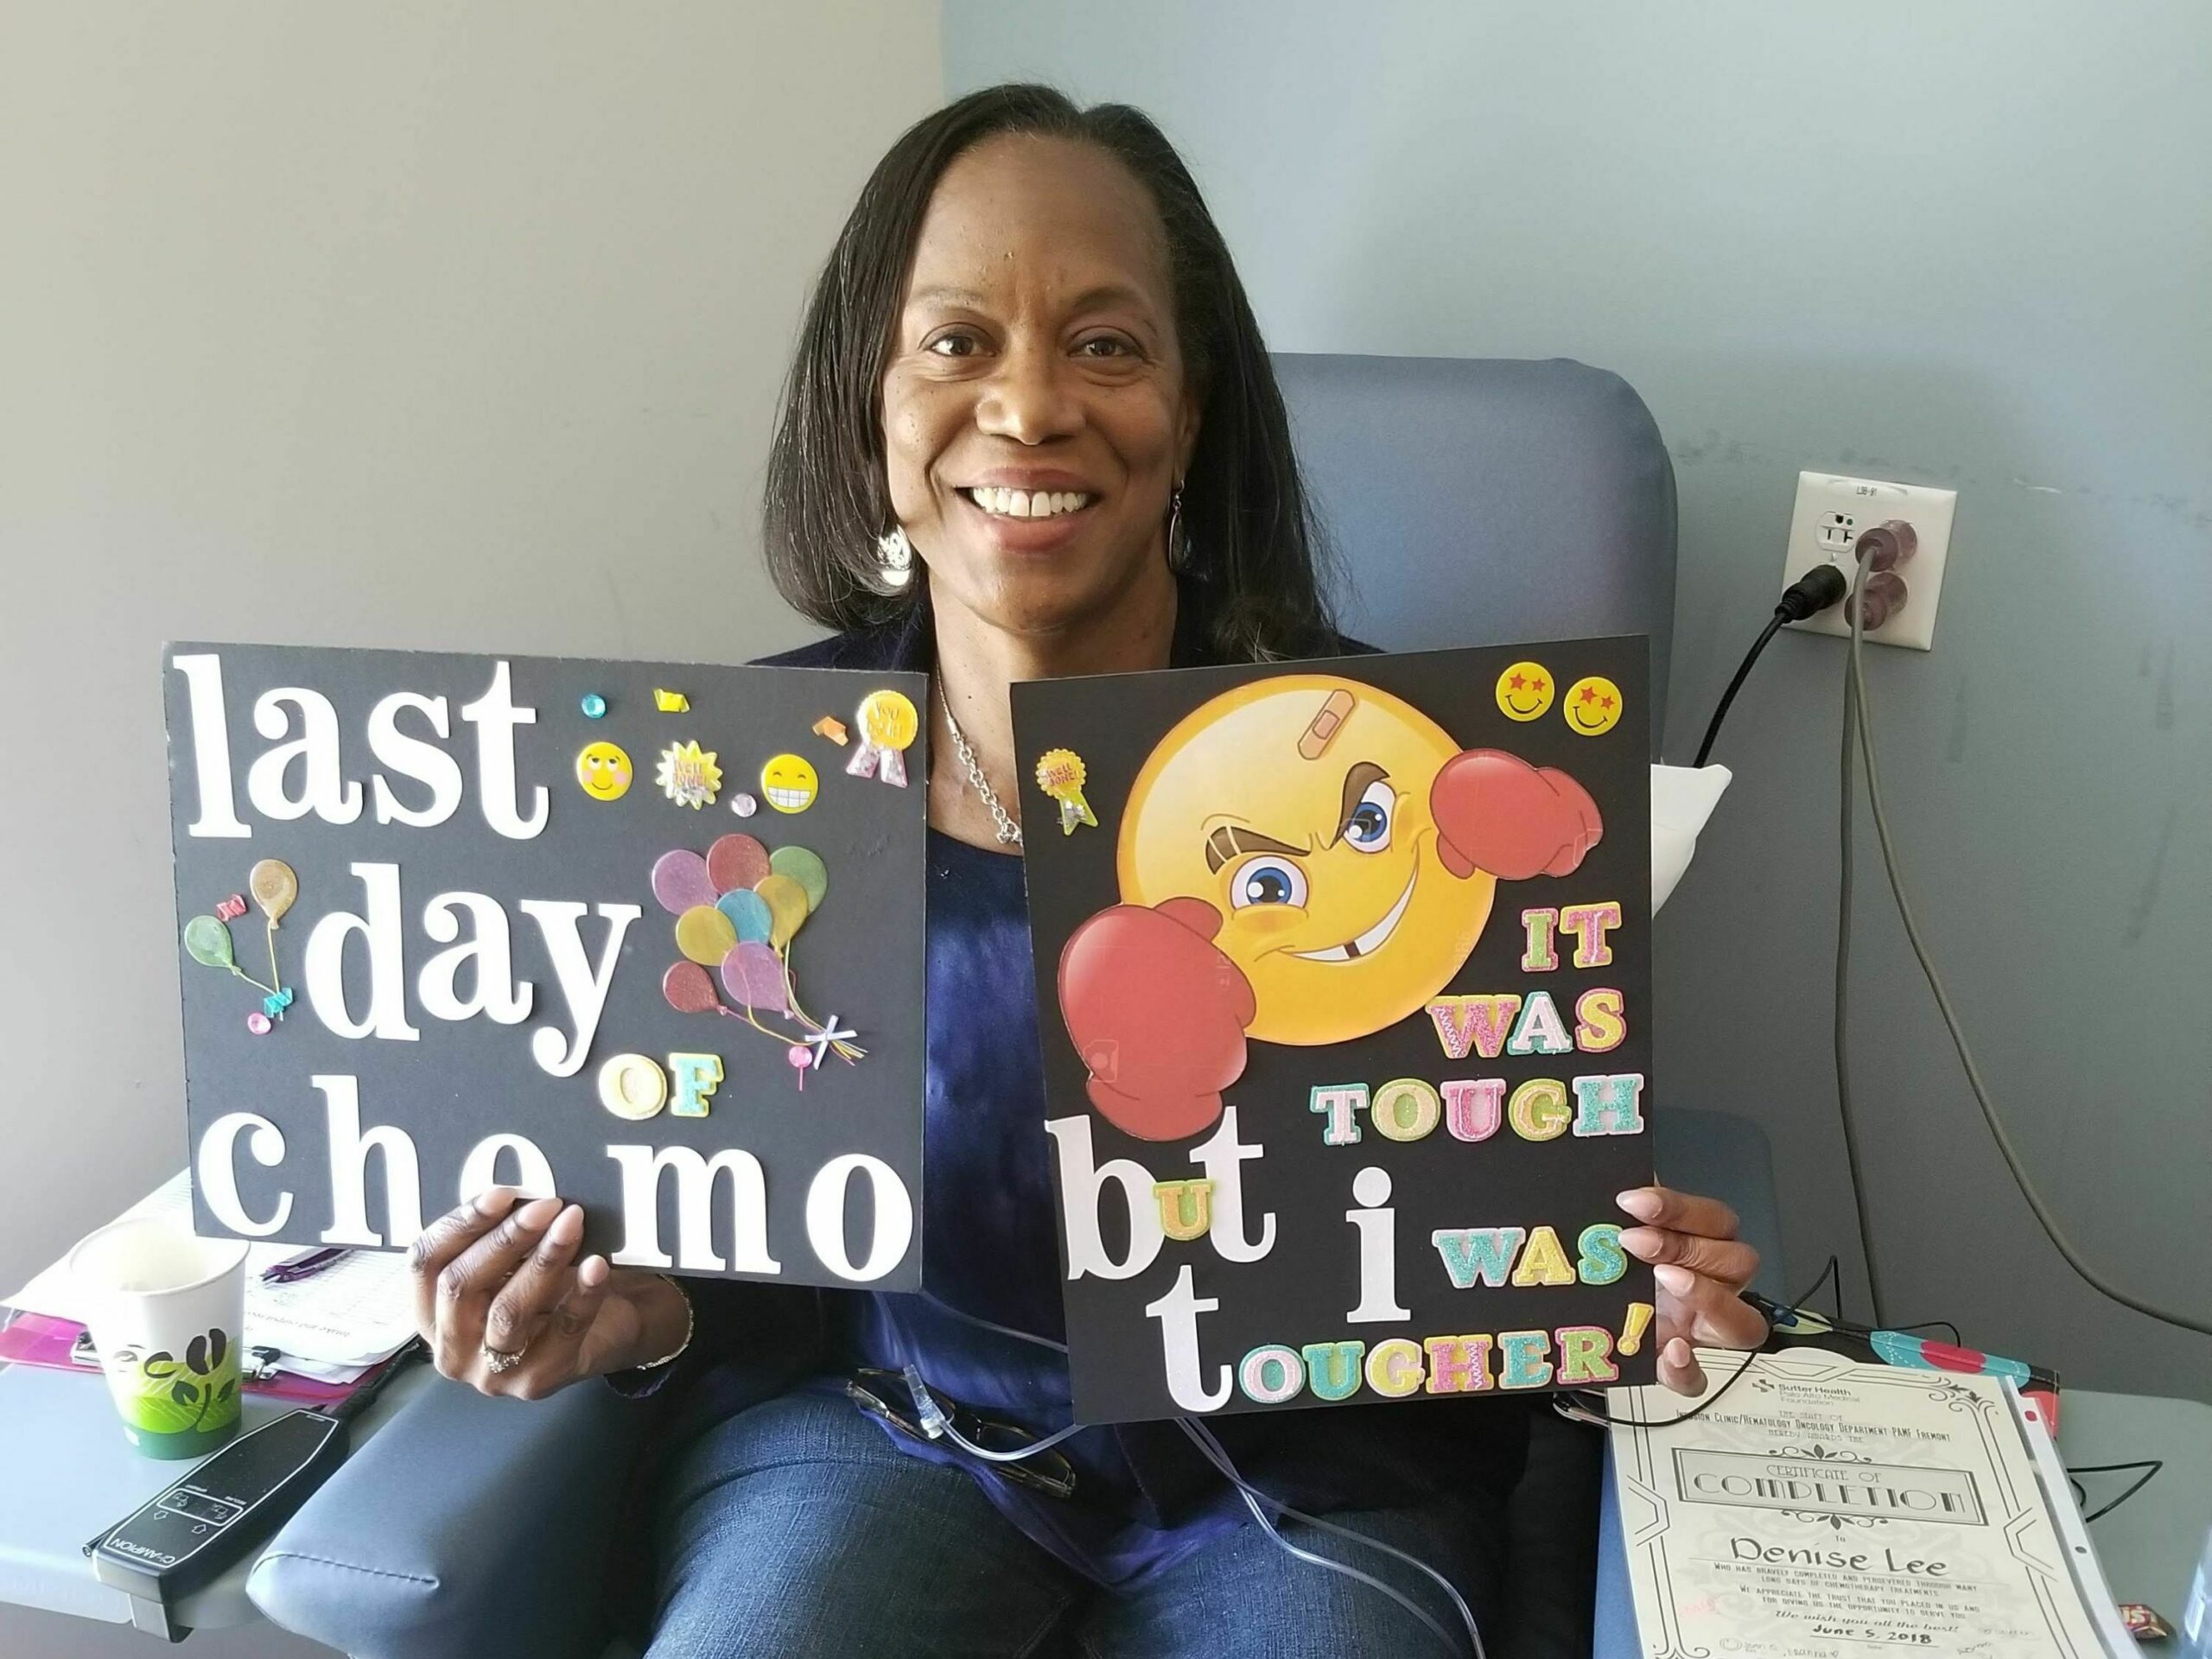 Denise Lee on her last day of chemo. In addition to chemo and surgery, she was treated with immunotherapy. She's currently in remission.